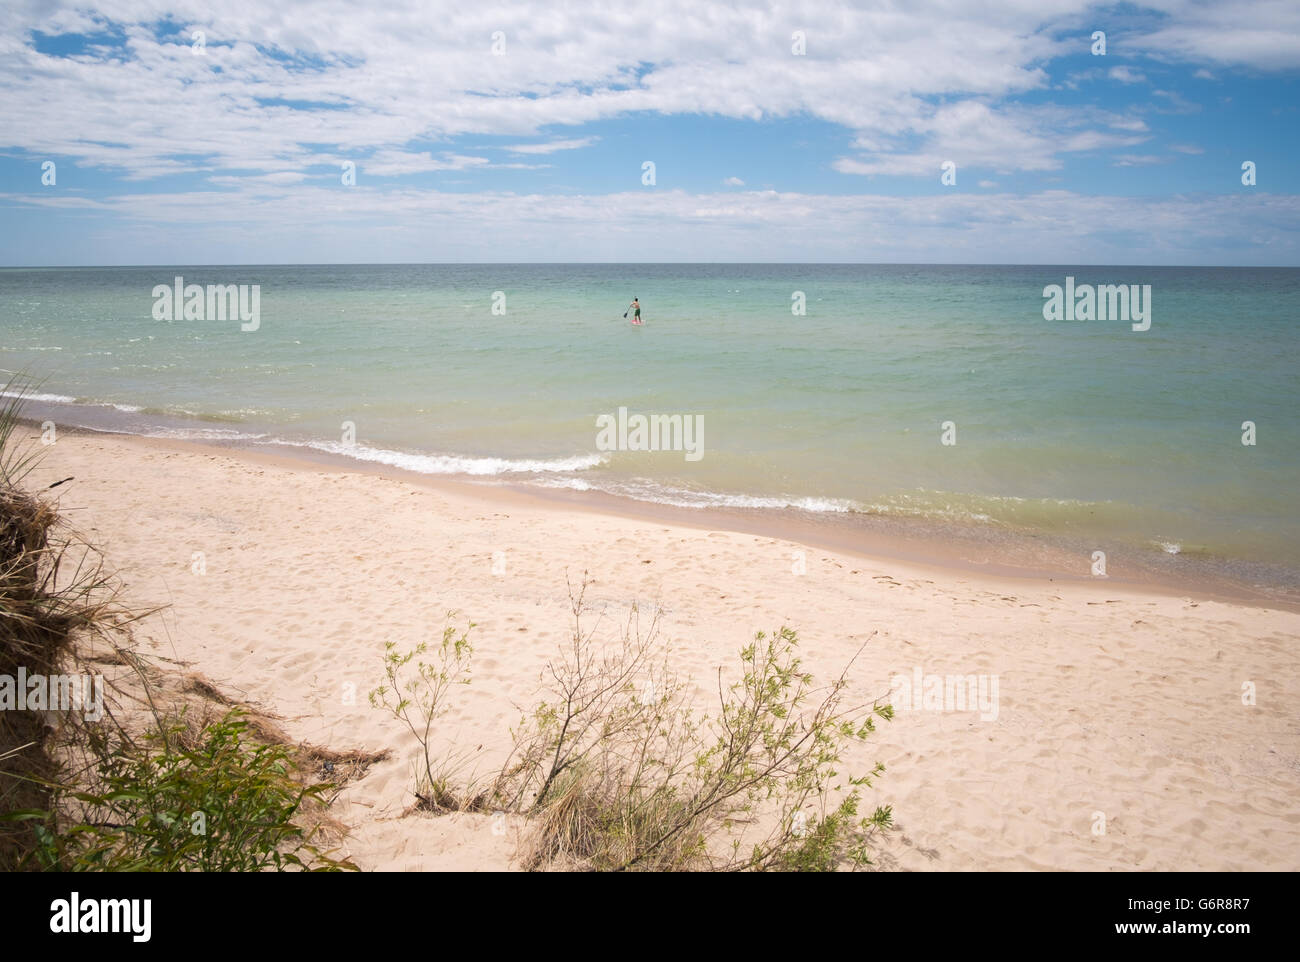 Young man riding a paddle board on Lake Michigan offshore from Arcadia, Michigan. Stock Photo